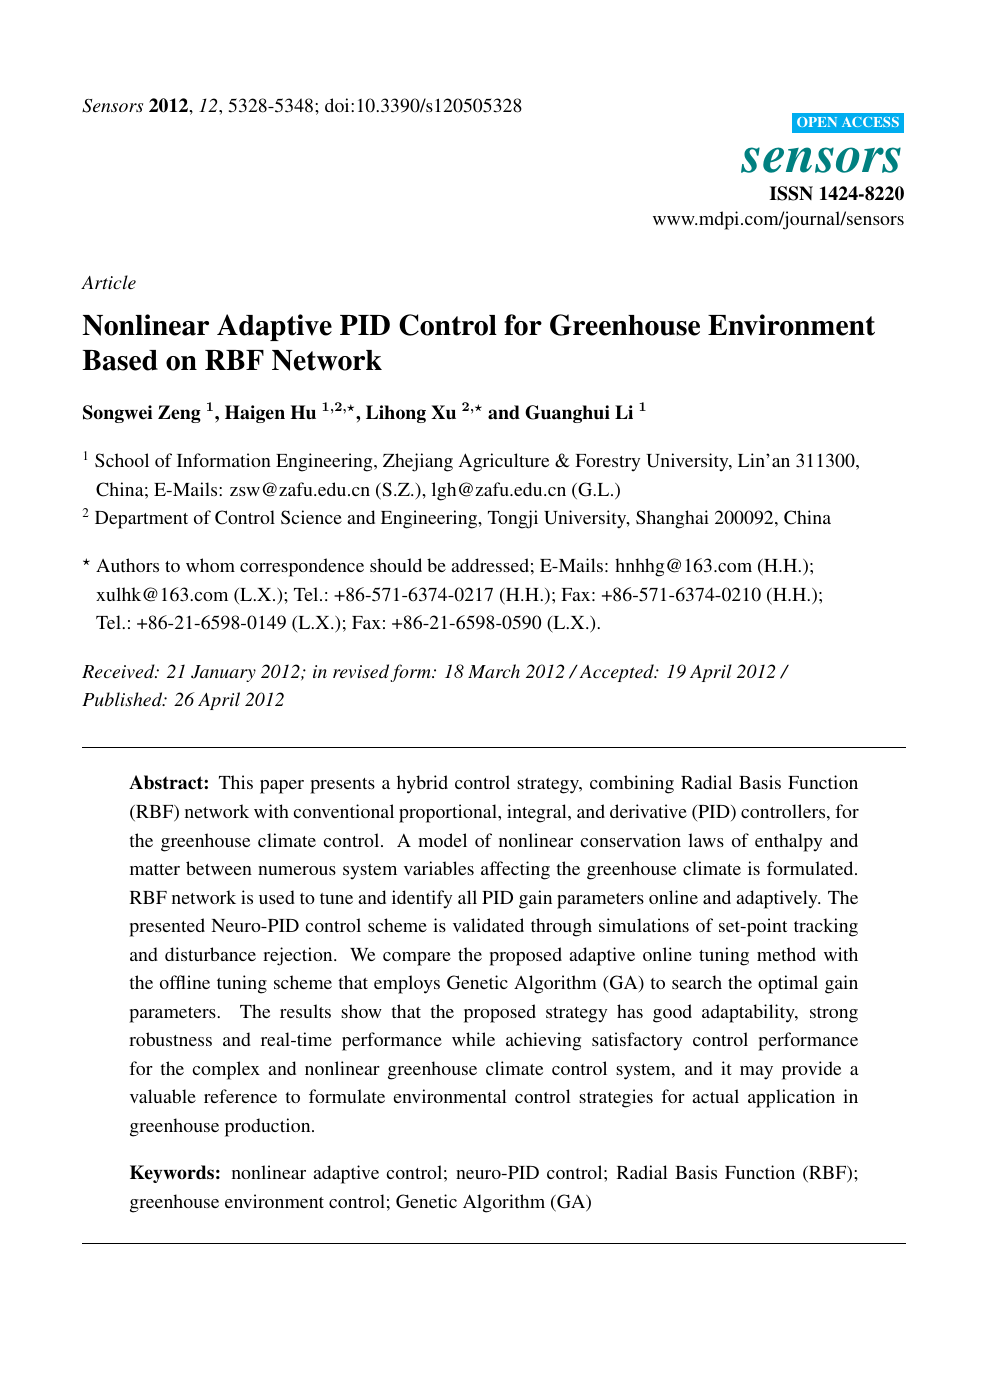 Nonlinear Adaptive Pid Control For Greenhouse Environment Based On Rbf Network Topic Of Research Paper In Computer And Information Sciences Download Scholarly Article Pdf And Read For Free On Cyberleninka Open